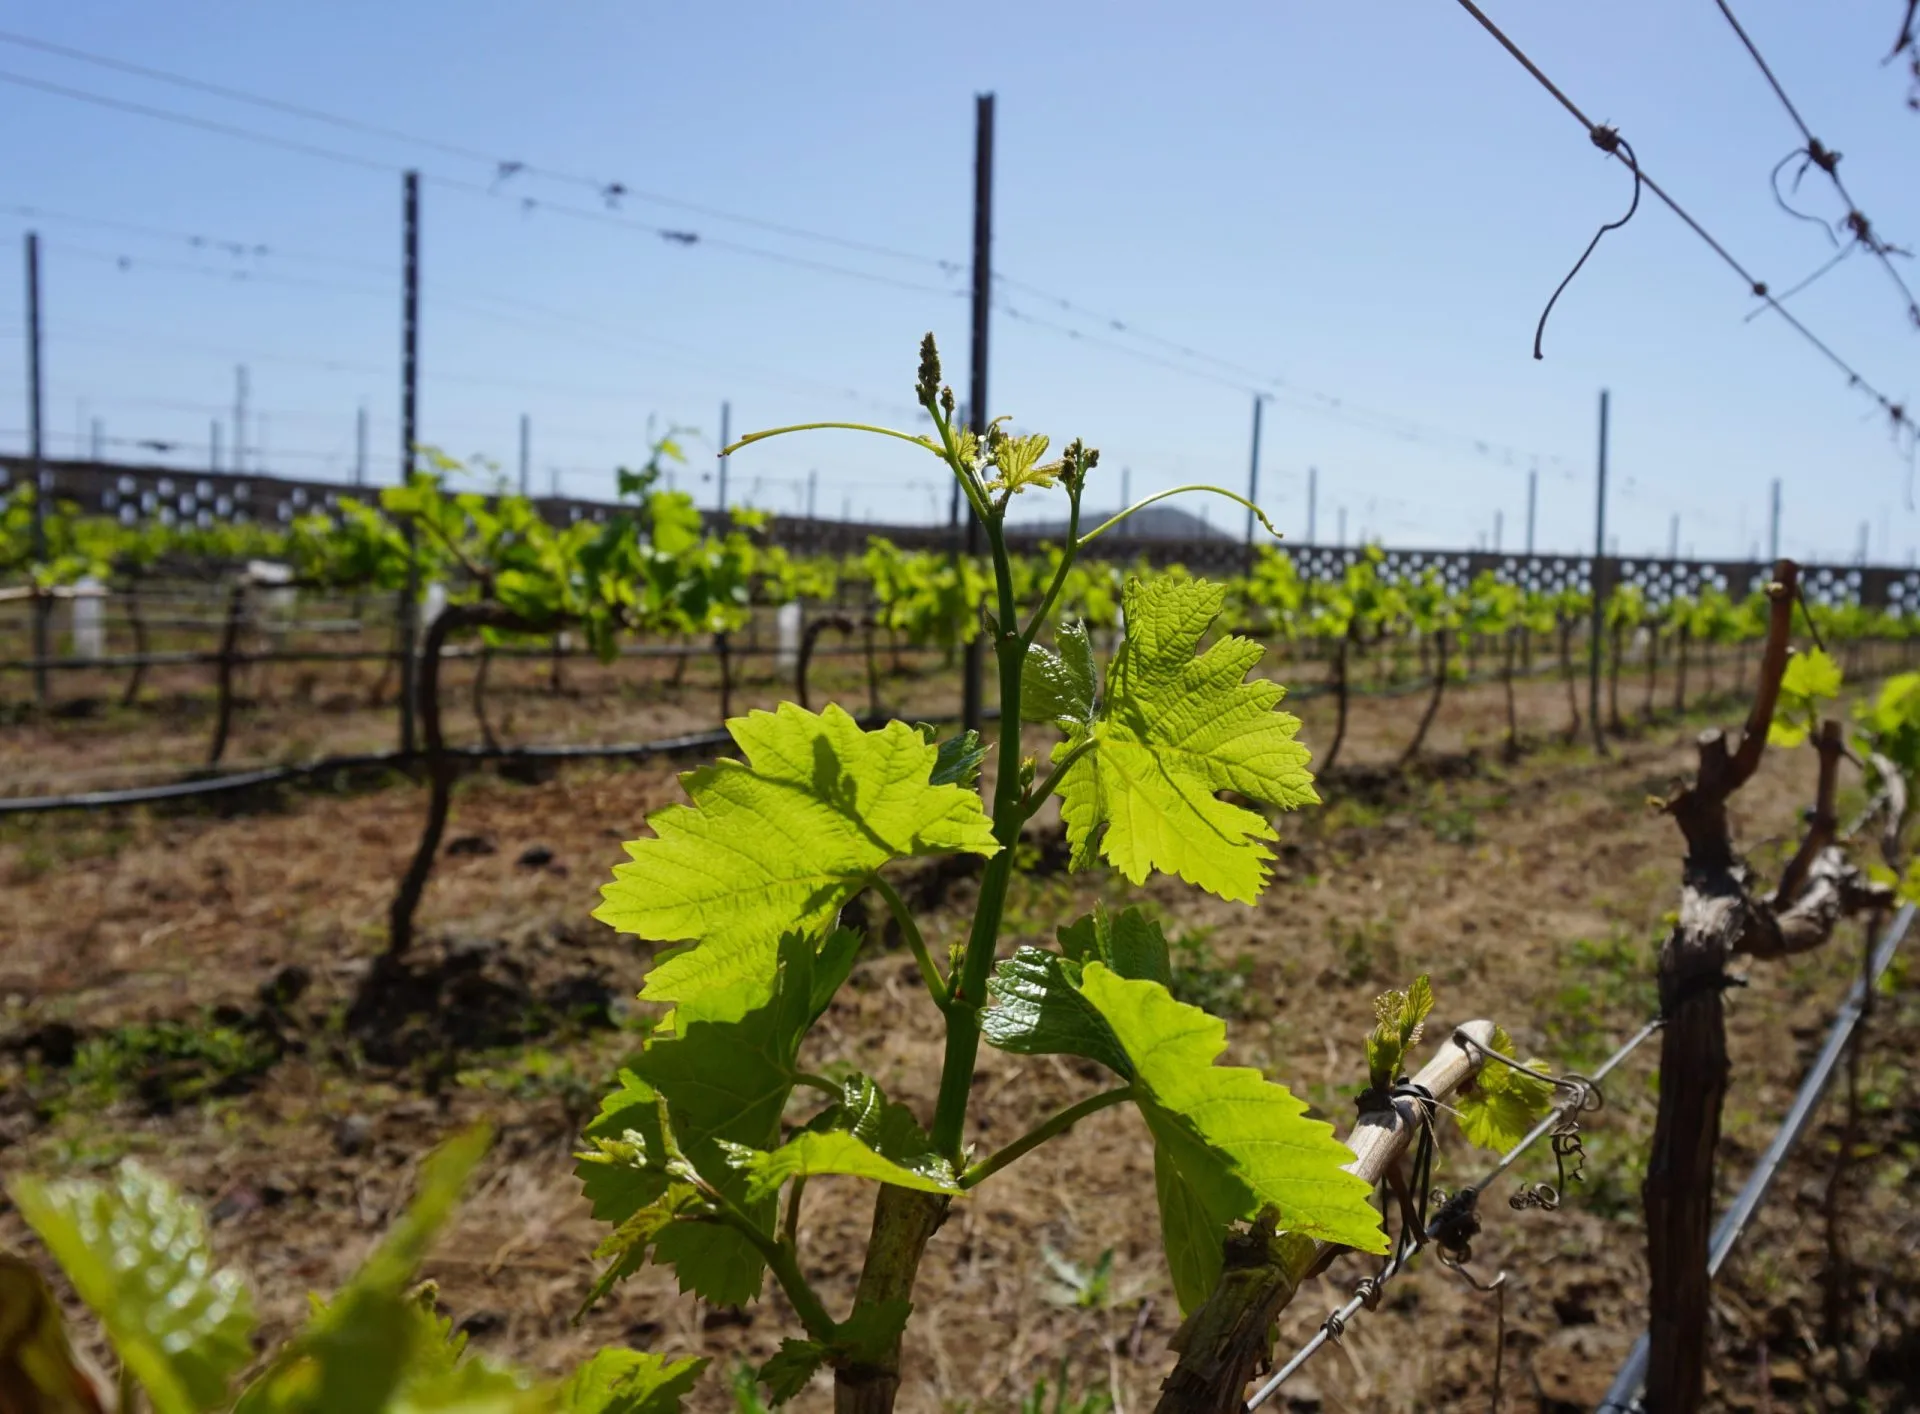 Grape plant of Marmajuelo variety with new fresh green leaves and  tiny bunches of grapes in the sun on a blue sky and vineyard background, April 2023, in Guimar, Tenerife, Canary Islands, Spain